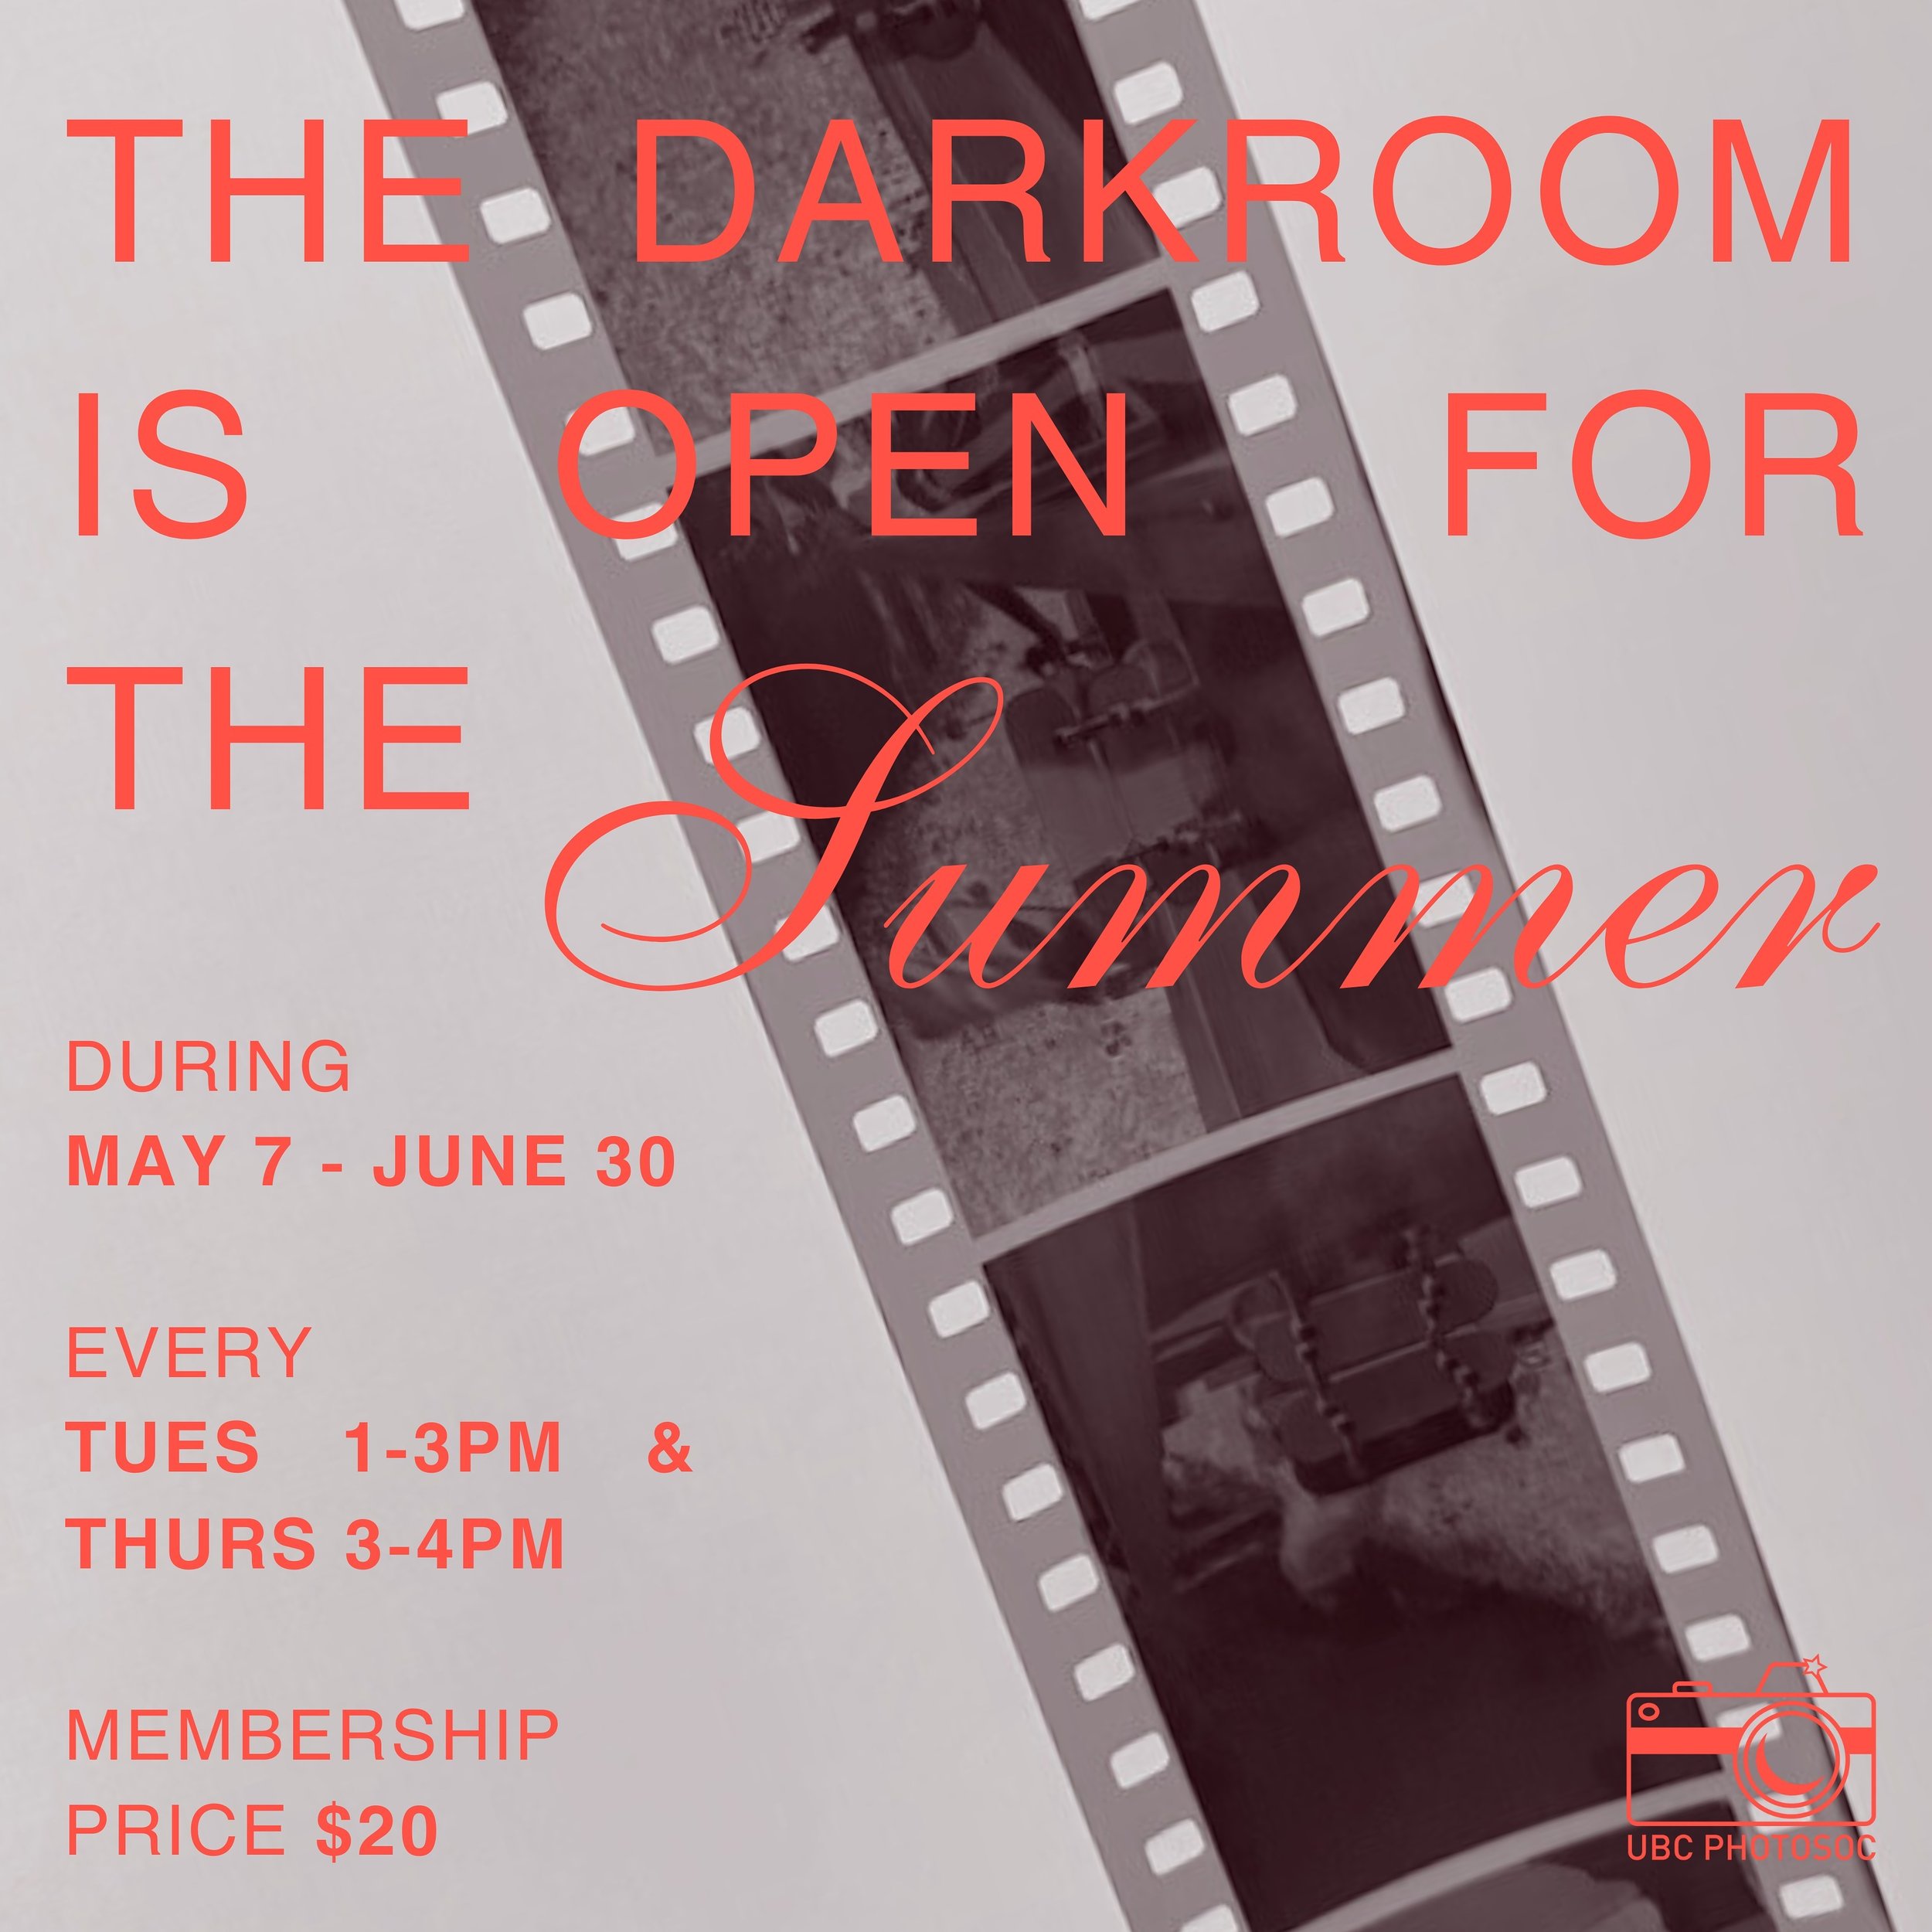 Exciting news! Our Darkroom will be open this Summer, from May 7th to June 30th, every Tuesday 1-3pm and Thursday 3-4pm. Membership prices are only $20 dollars for the whole term (DEBIT OR CREDIT ONLY)! Come in at anytime during these hours to buy yo